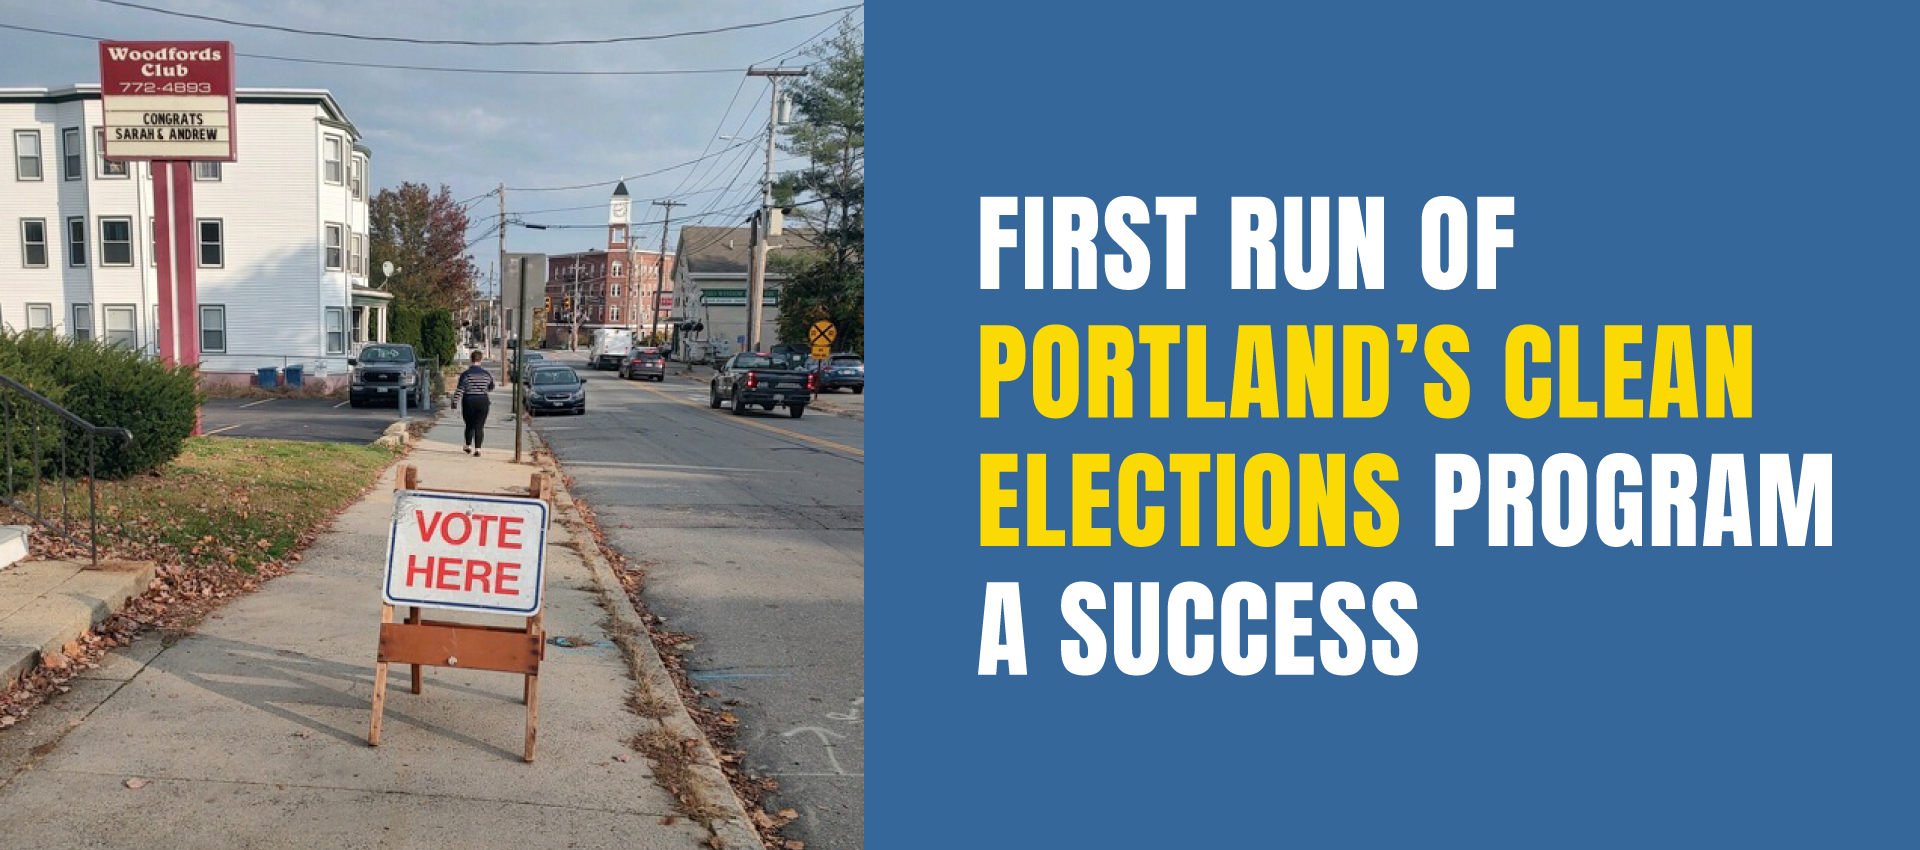 First Run of Portland’s Clean Elections Program a Success. Click here to learn more!